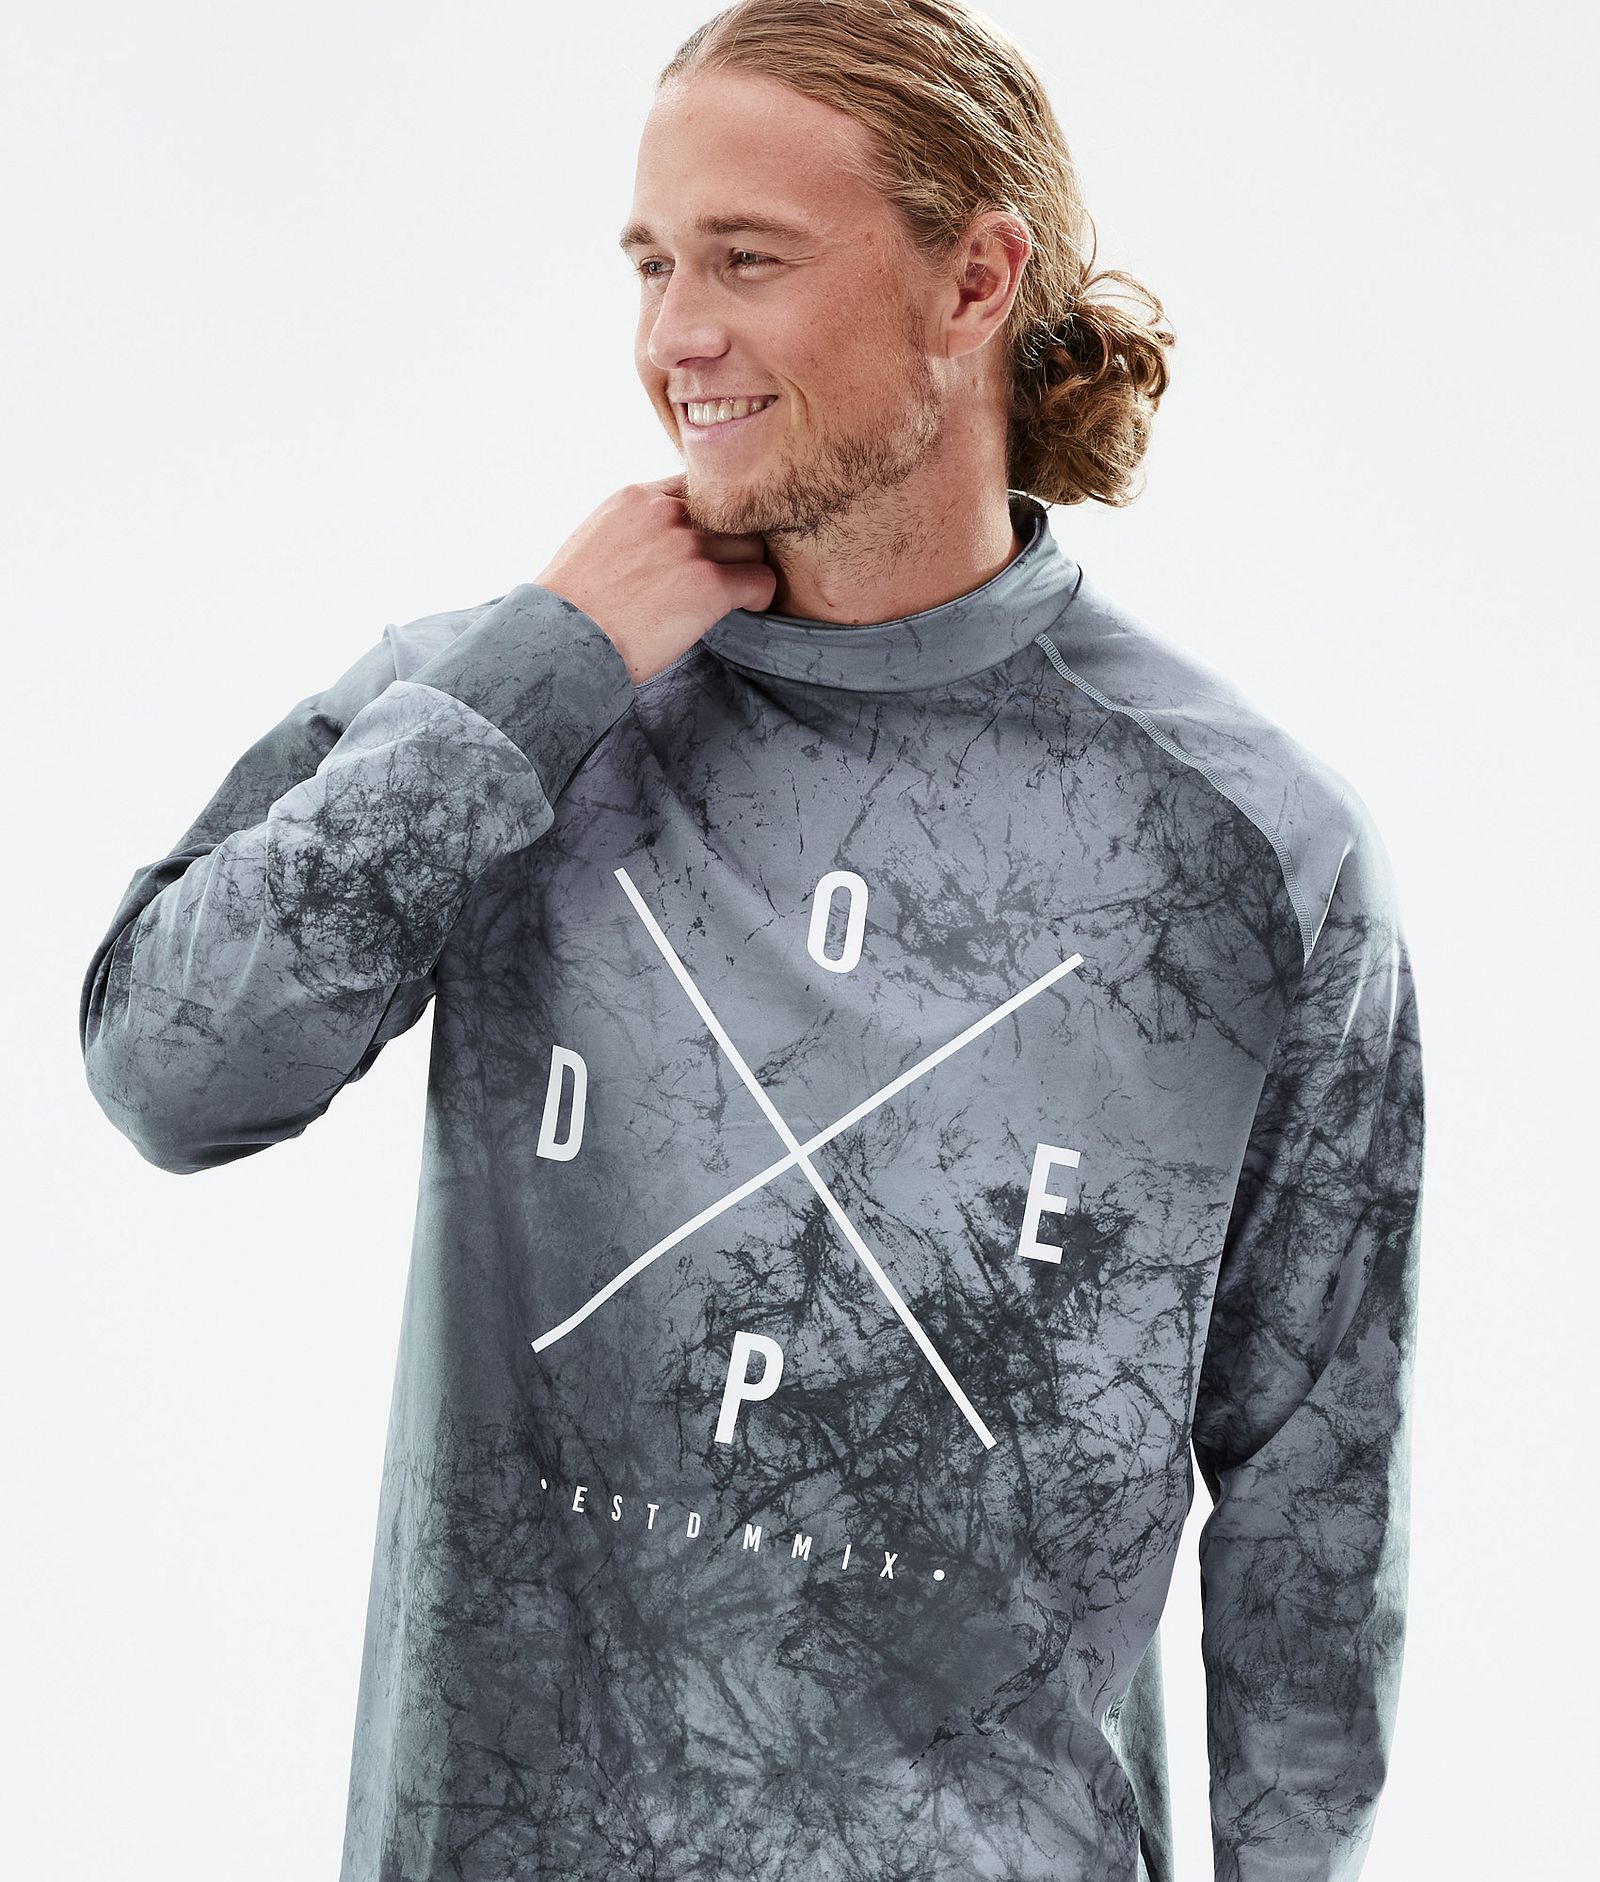 Dope Snuggle 2022 Tee-shirt thermique Homme 2X-Up Dirt, Image 2 sur 5